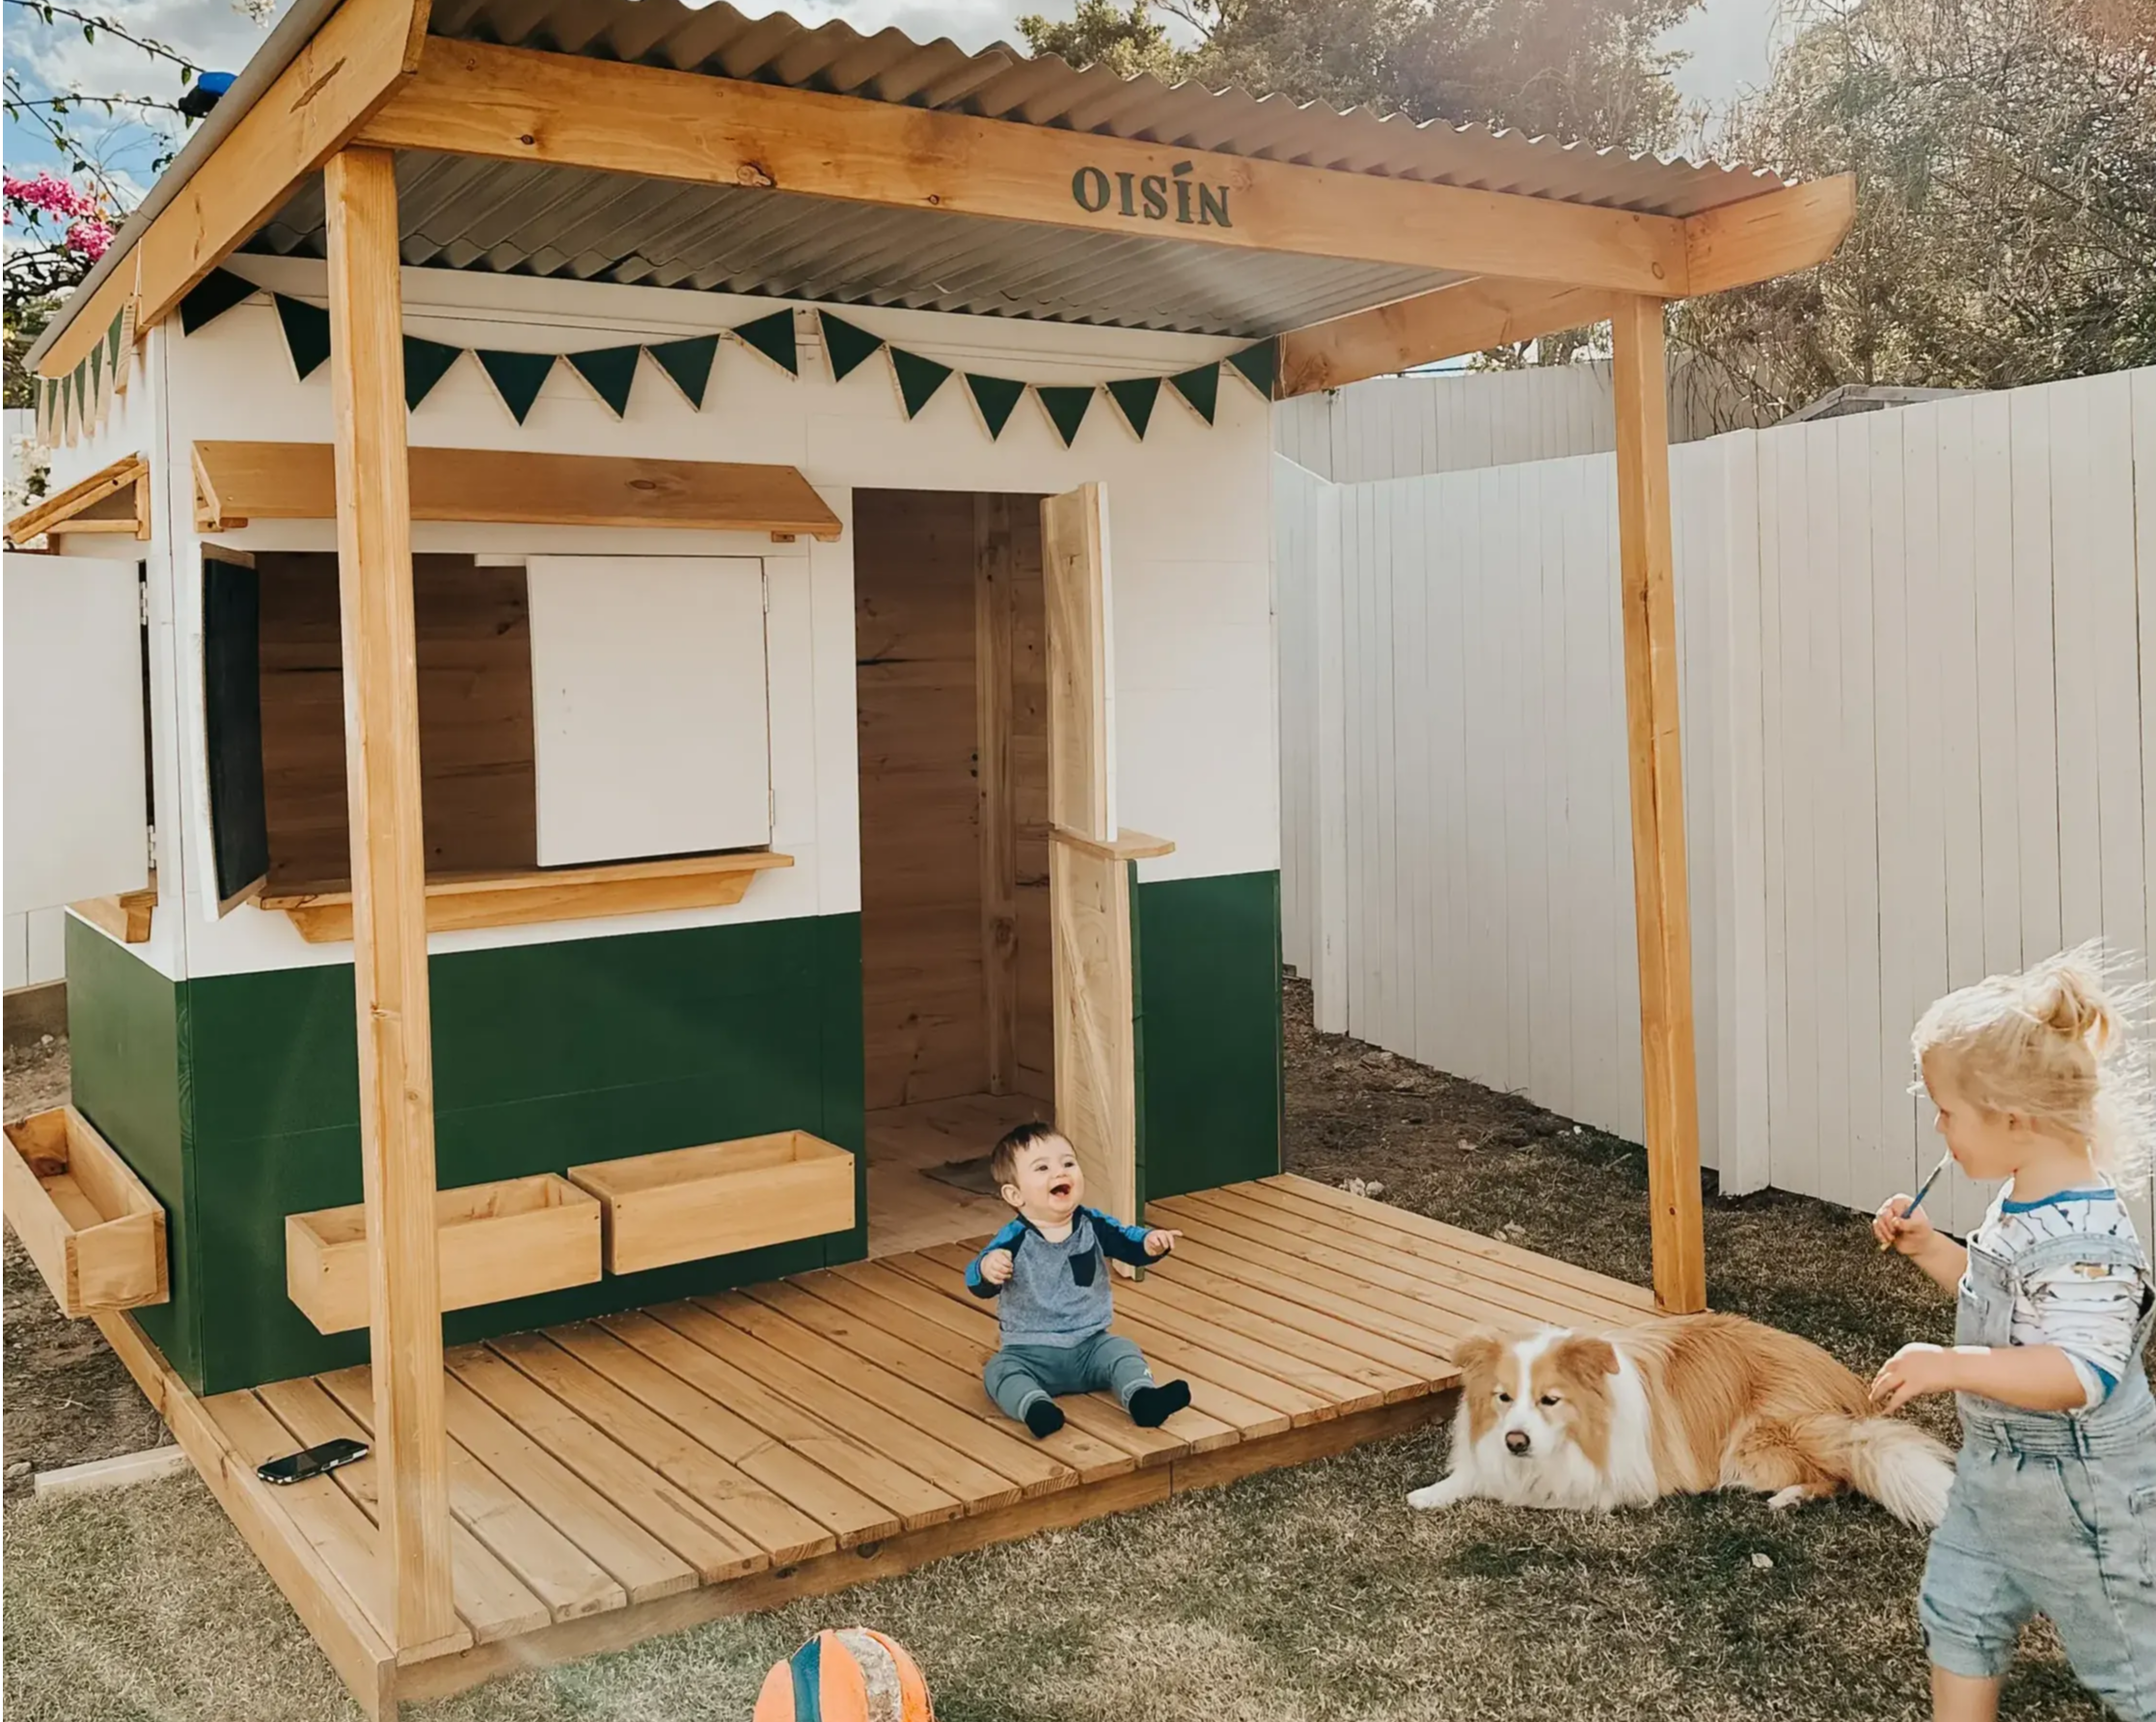 Kids having a play time at an extended cubby house